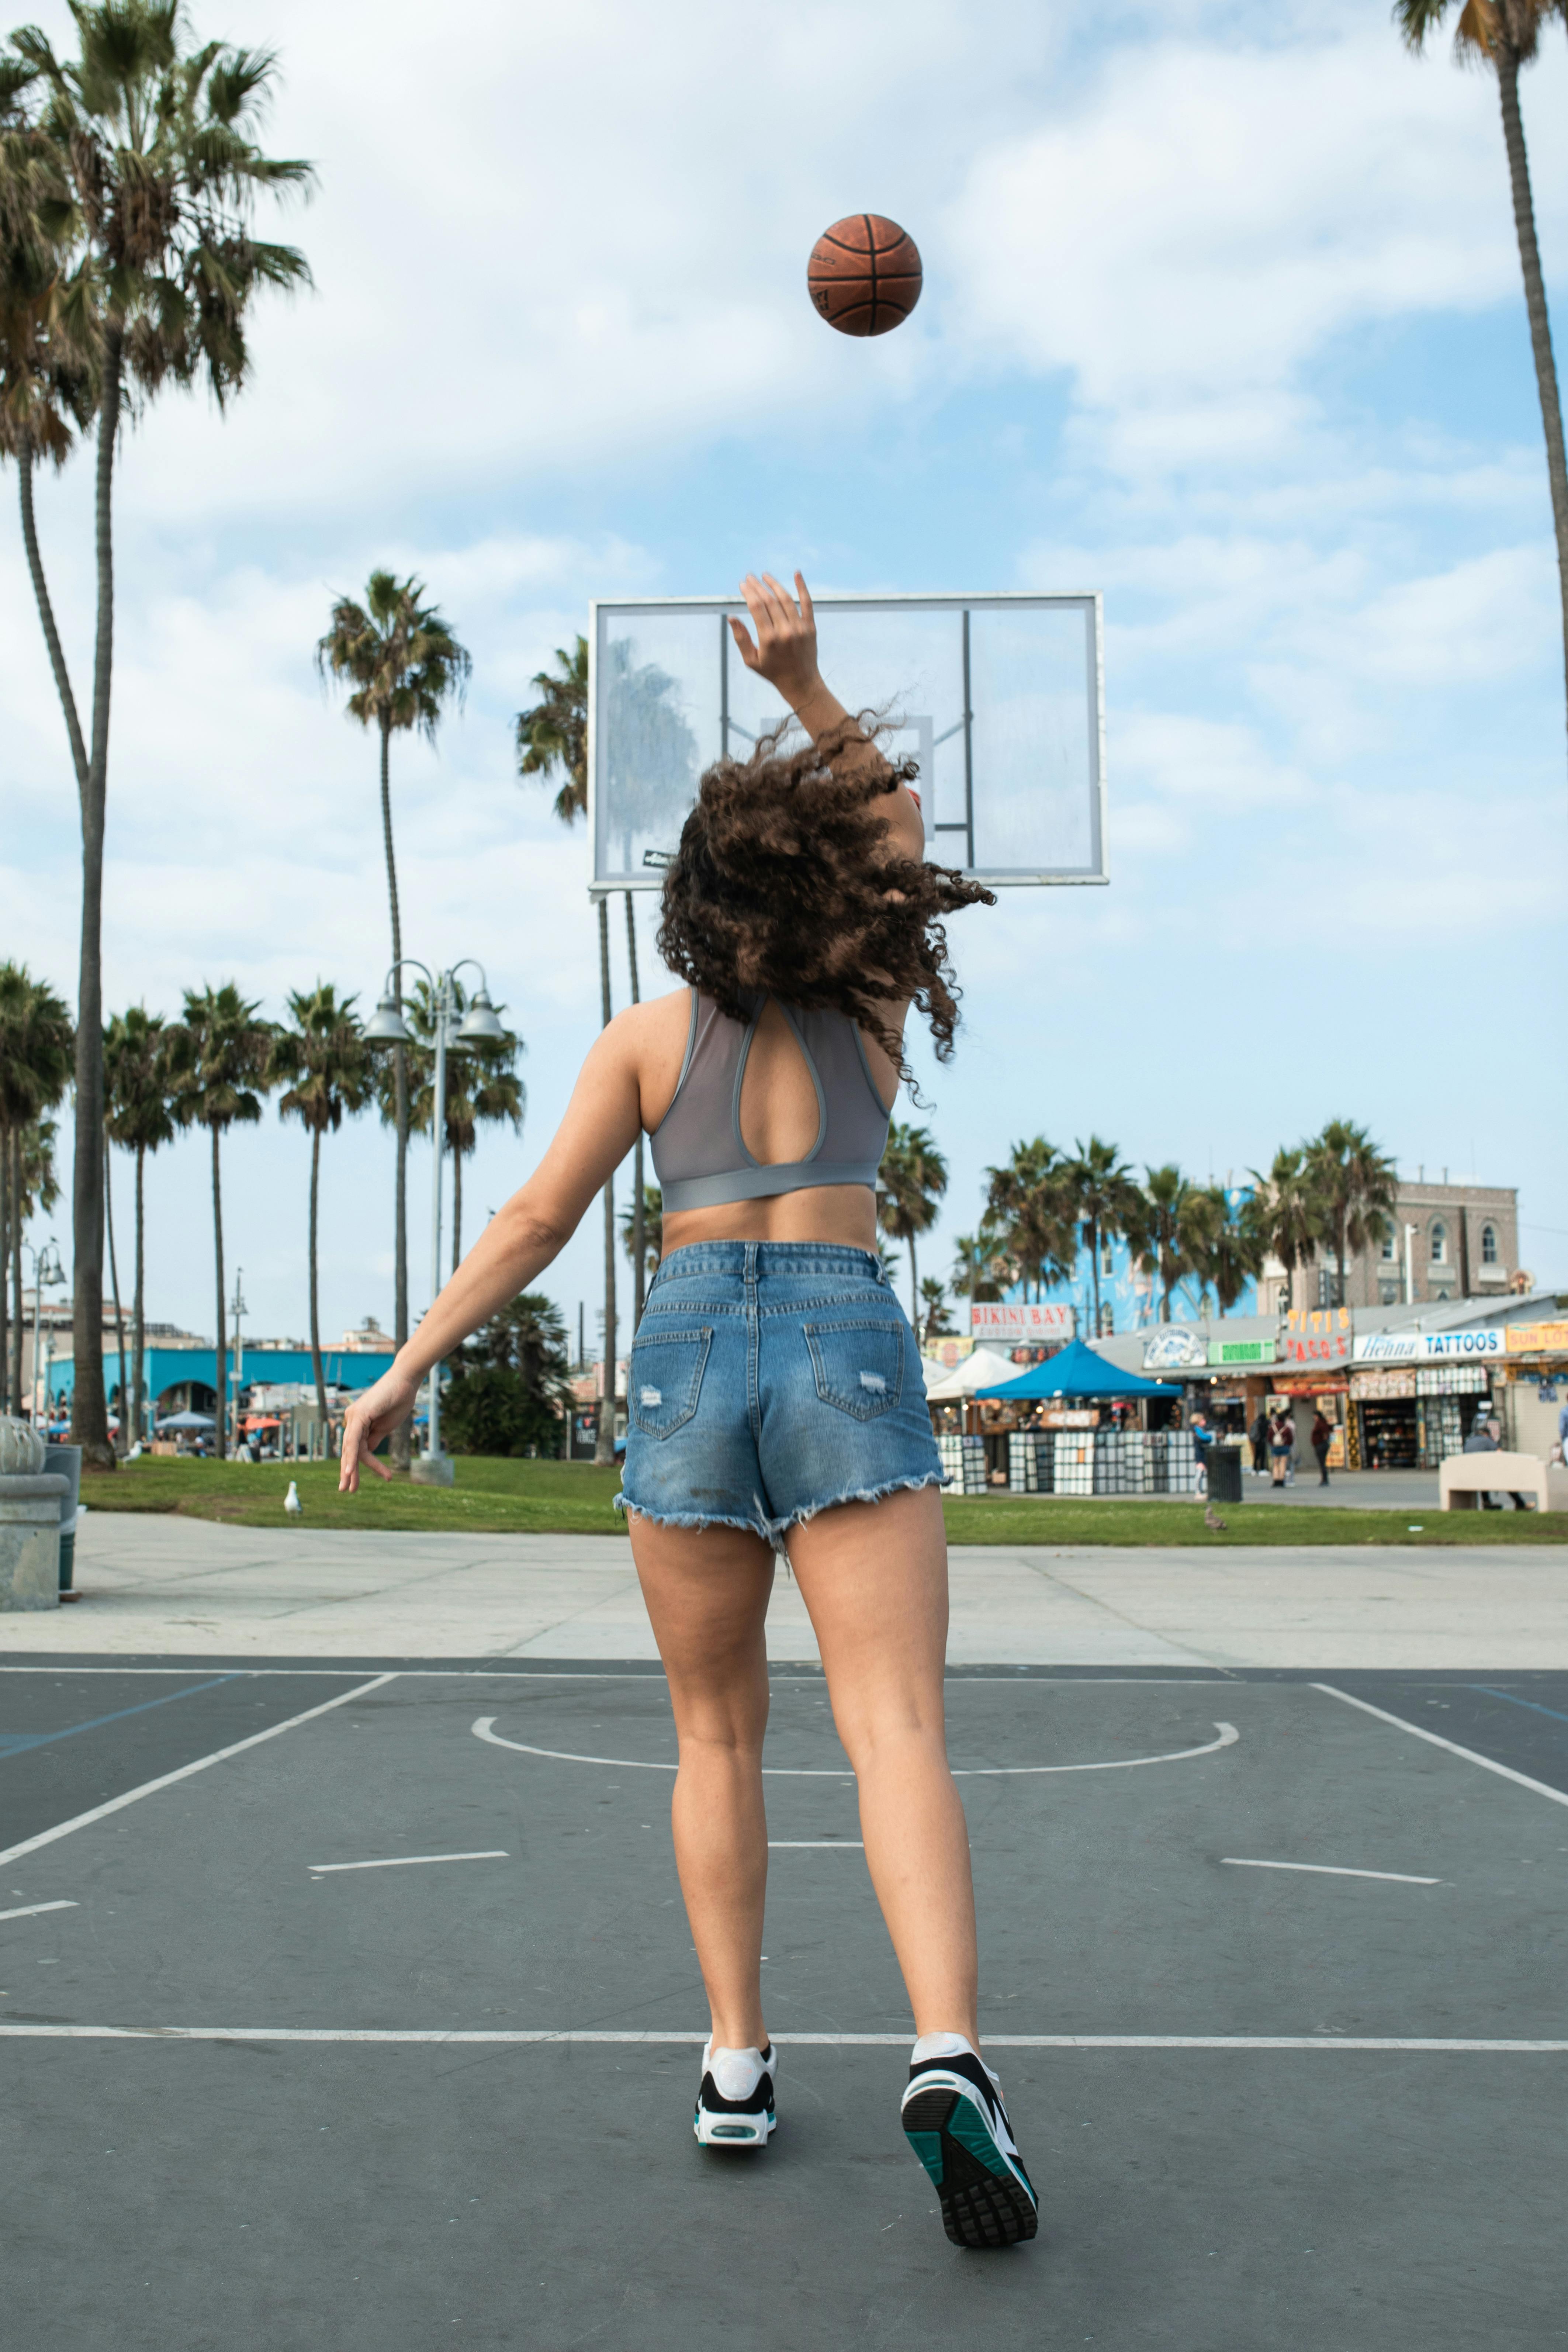 Woman in Blue Denim Shorts Standing on Basketball Court · Free Stock Photo